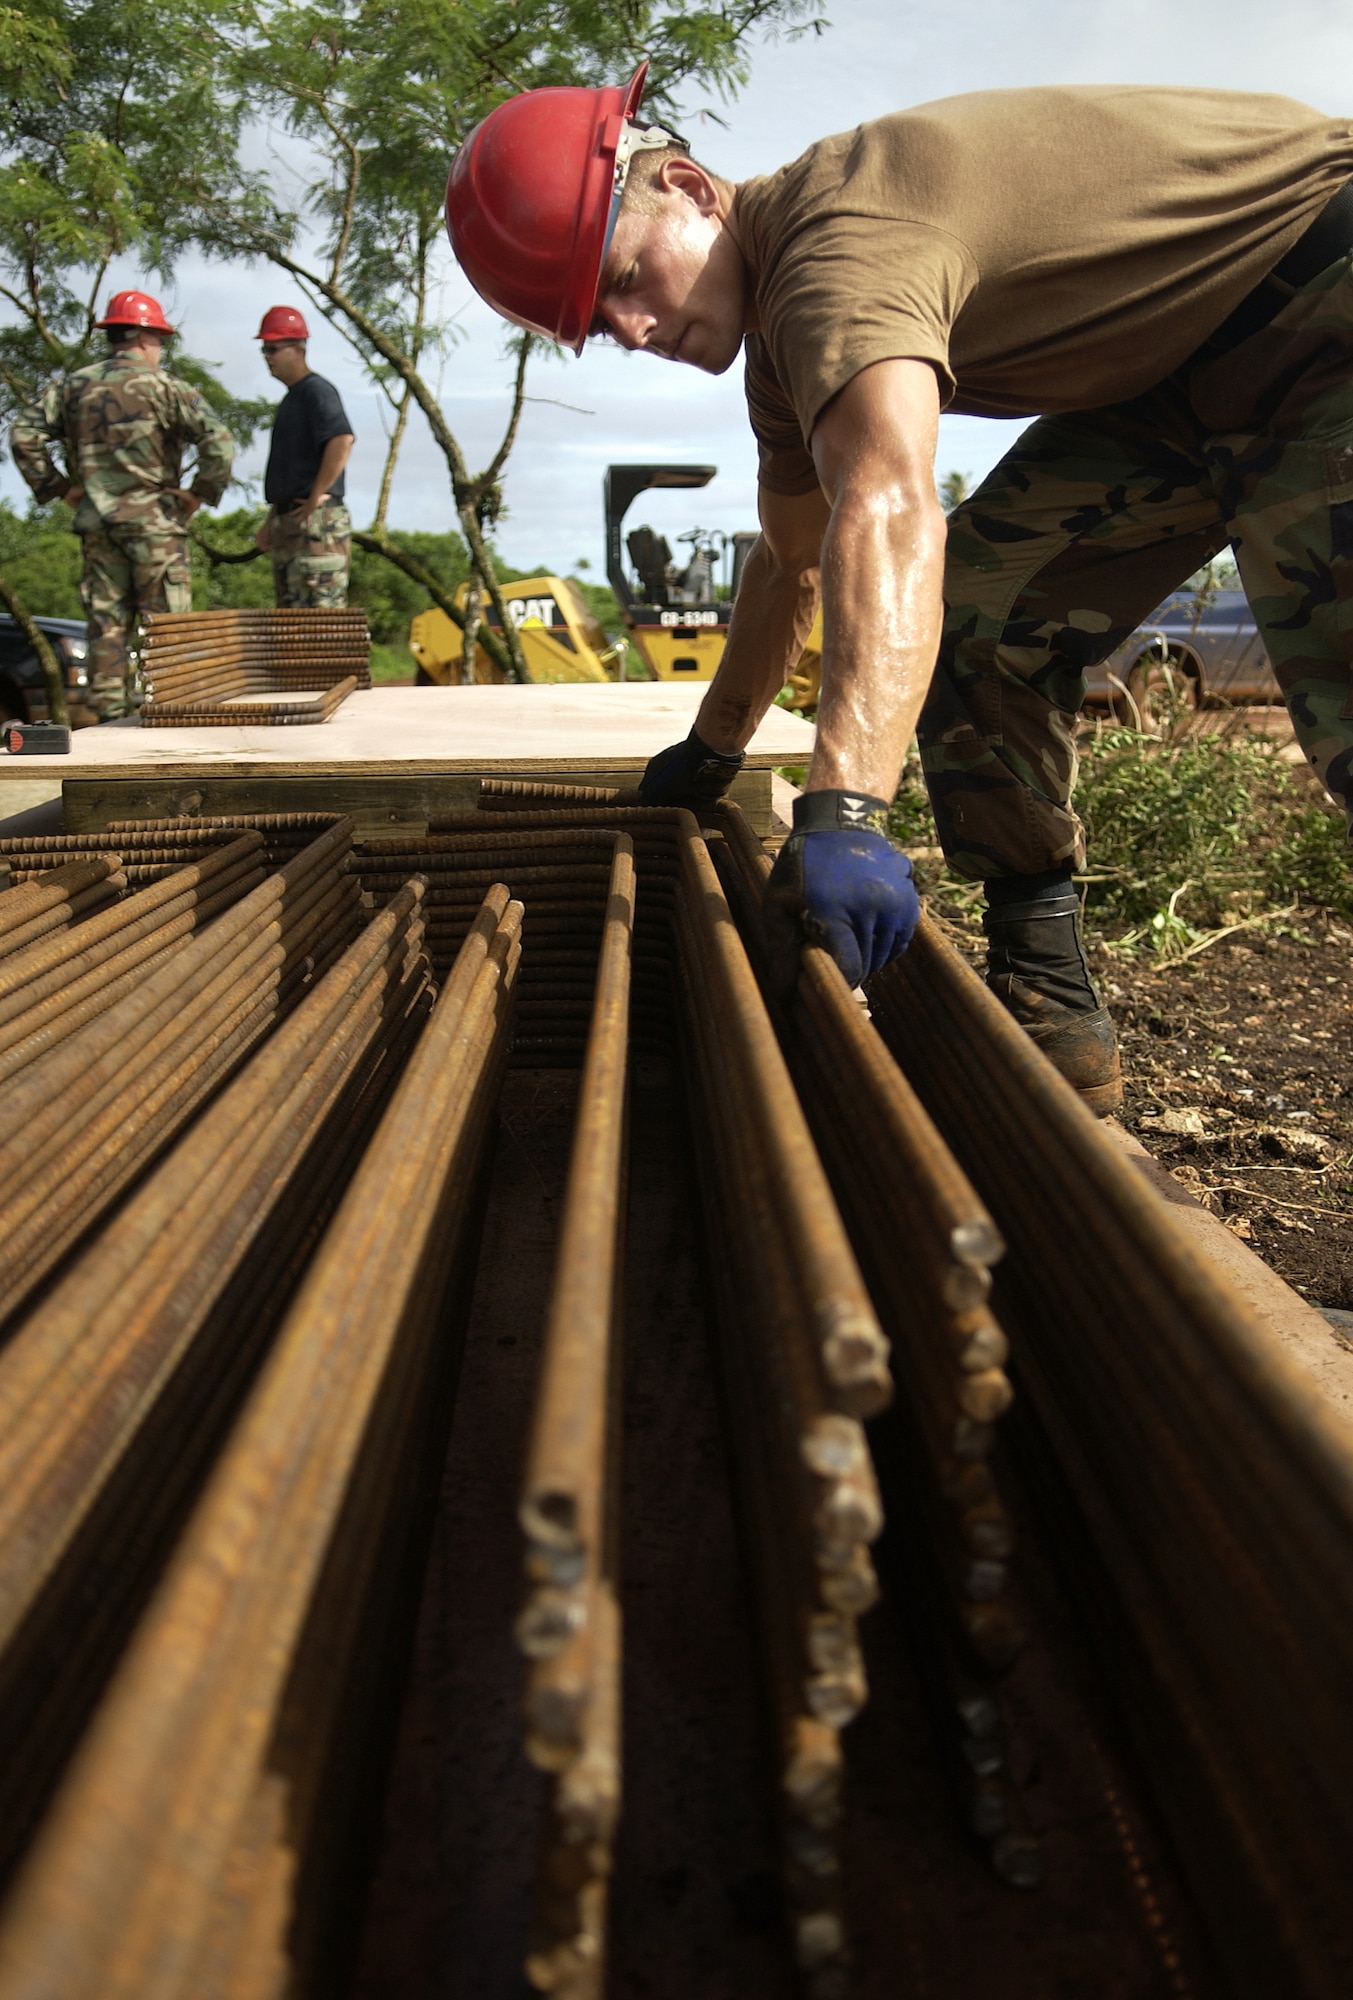 ANDERSEN AIR FORCE BASE, Guam - Airman 1st Class Christopher David, 554th RED HORSE Squadron, stacks pieces of rebar at Northwest Field, Aug. 22, 2007.  The 554th RED HORSE Squadron is currently building new infastructure on Northwest Field. (U.S. Air Force photo by Senior Airman Miranda Moorer/36th Wing Public Affairs) 